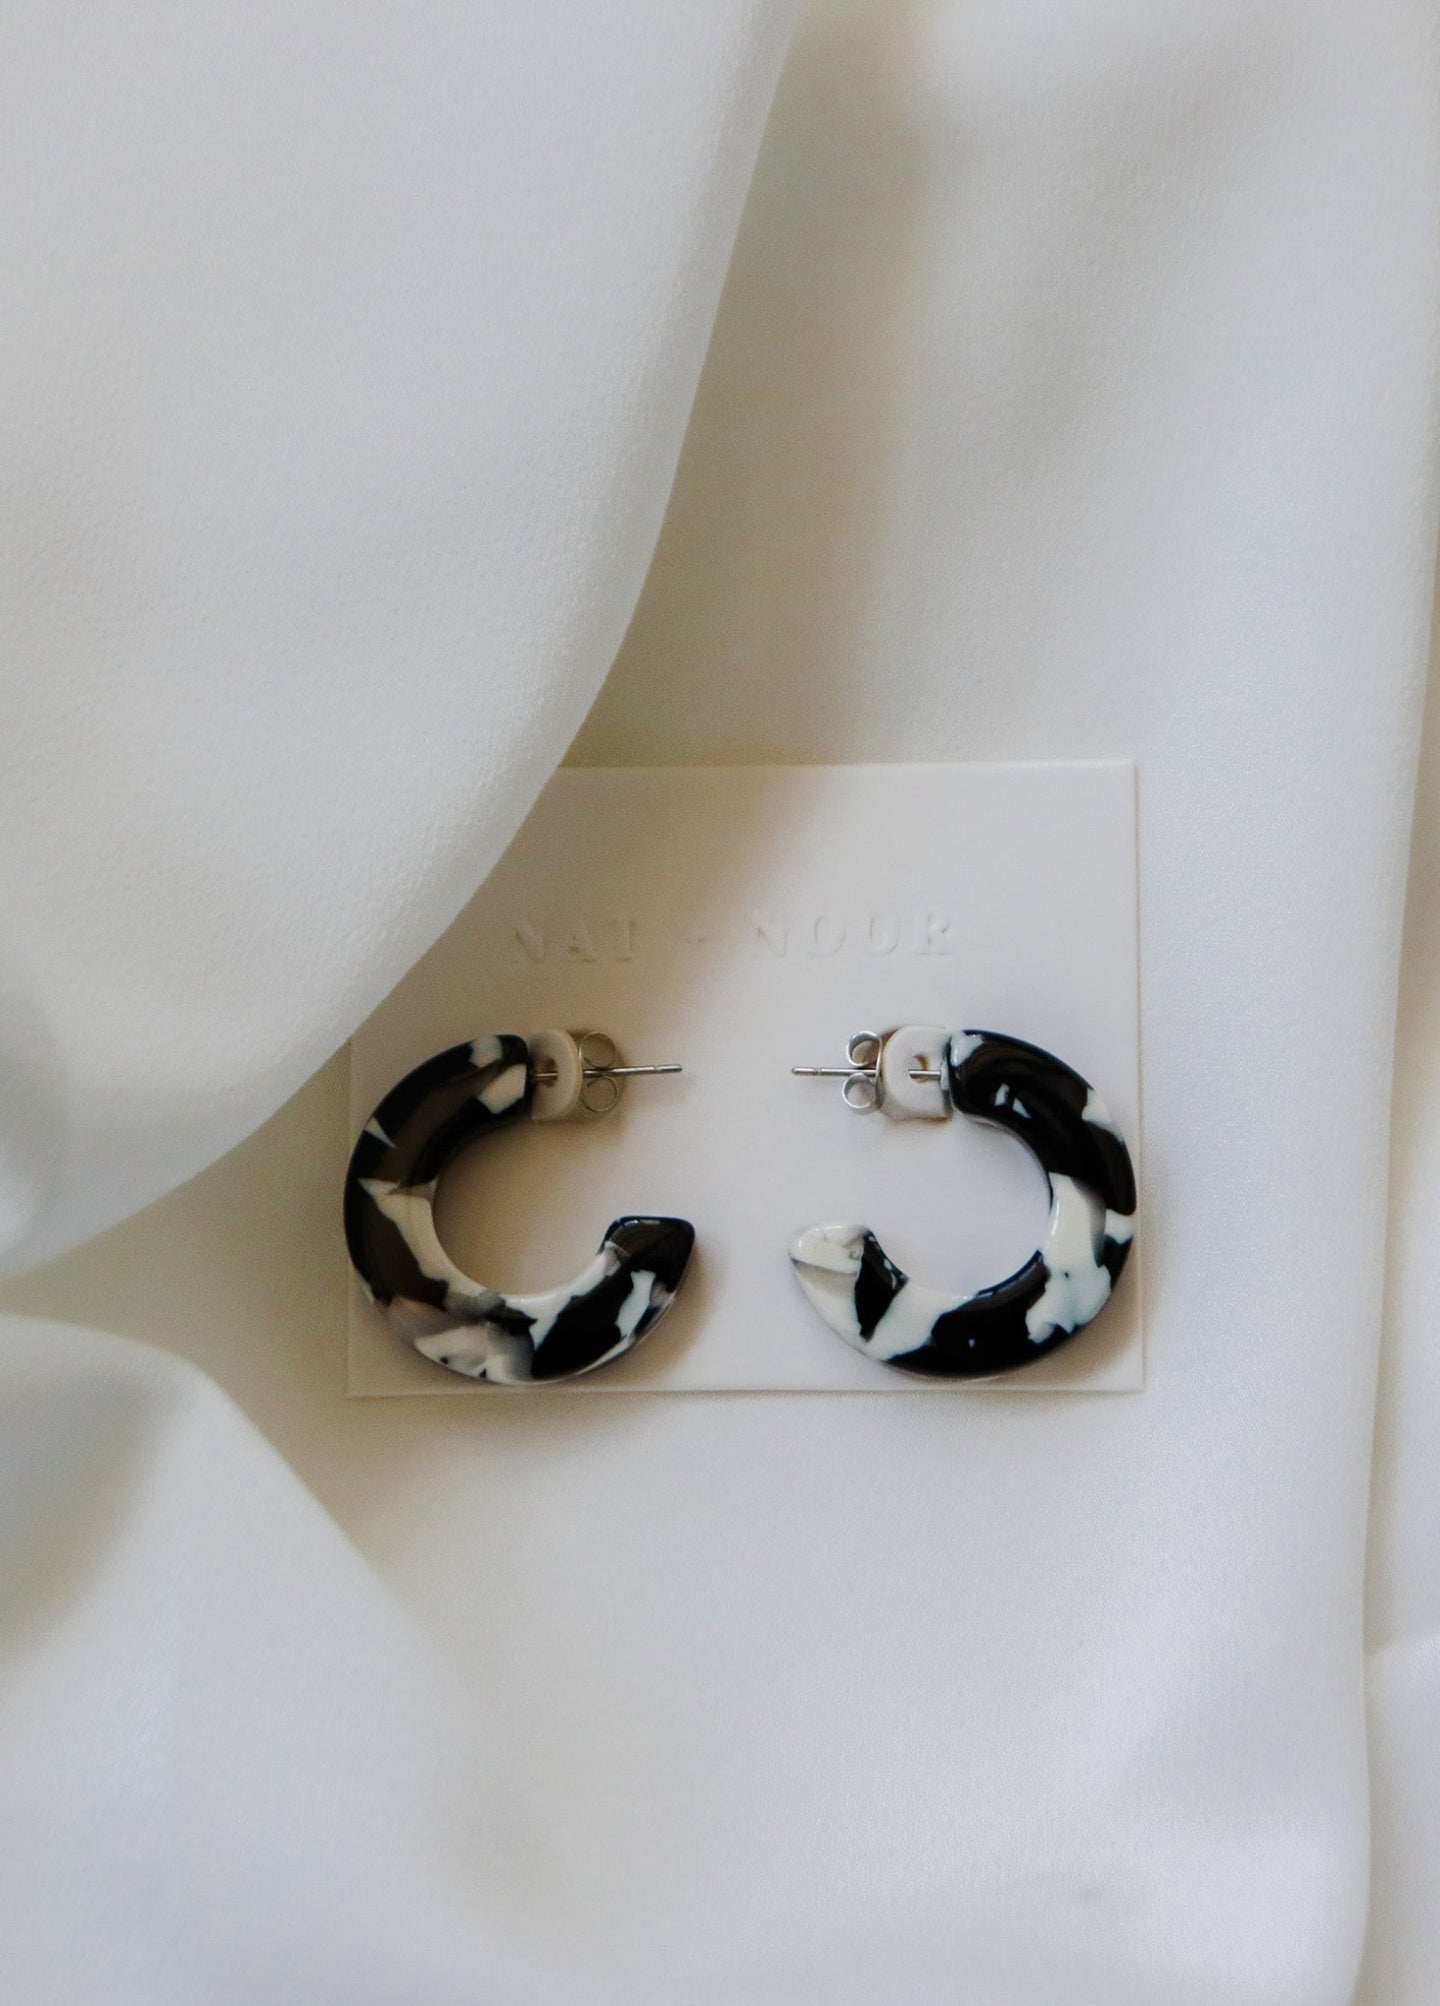 felicity hoop earrings in the color black + white. earrings are shown on an earring card laid on top of a white sheet.